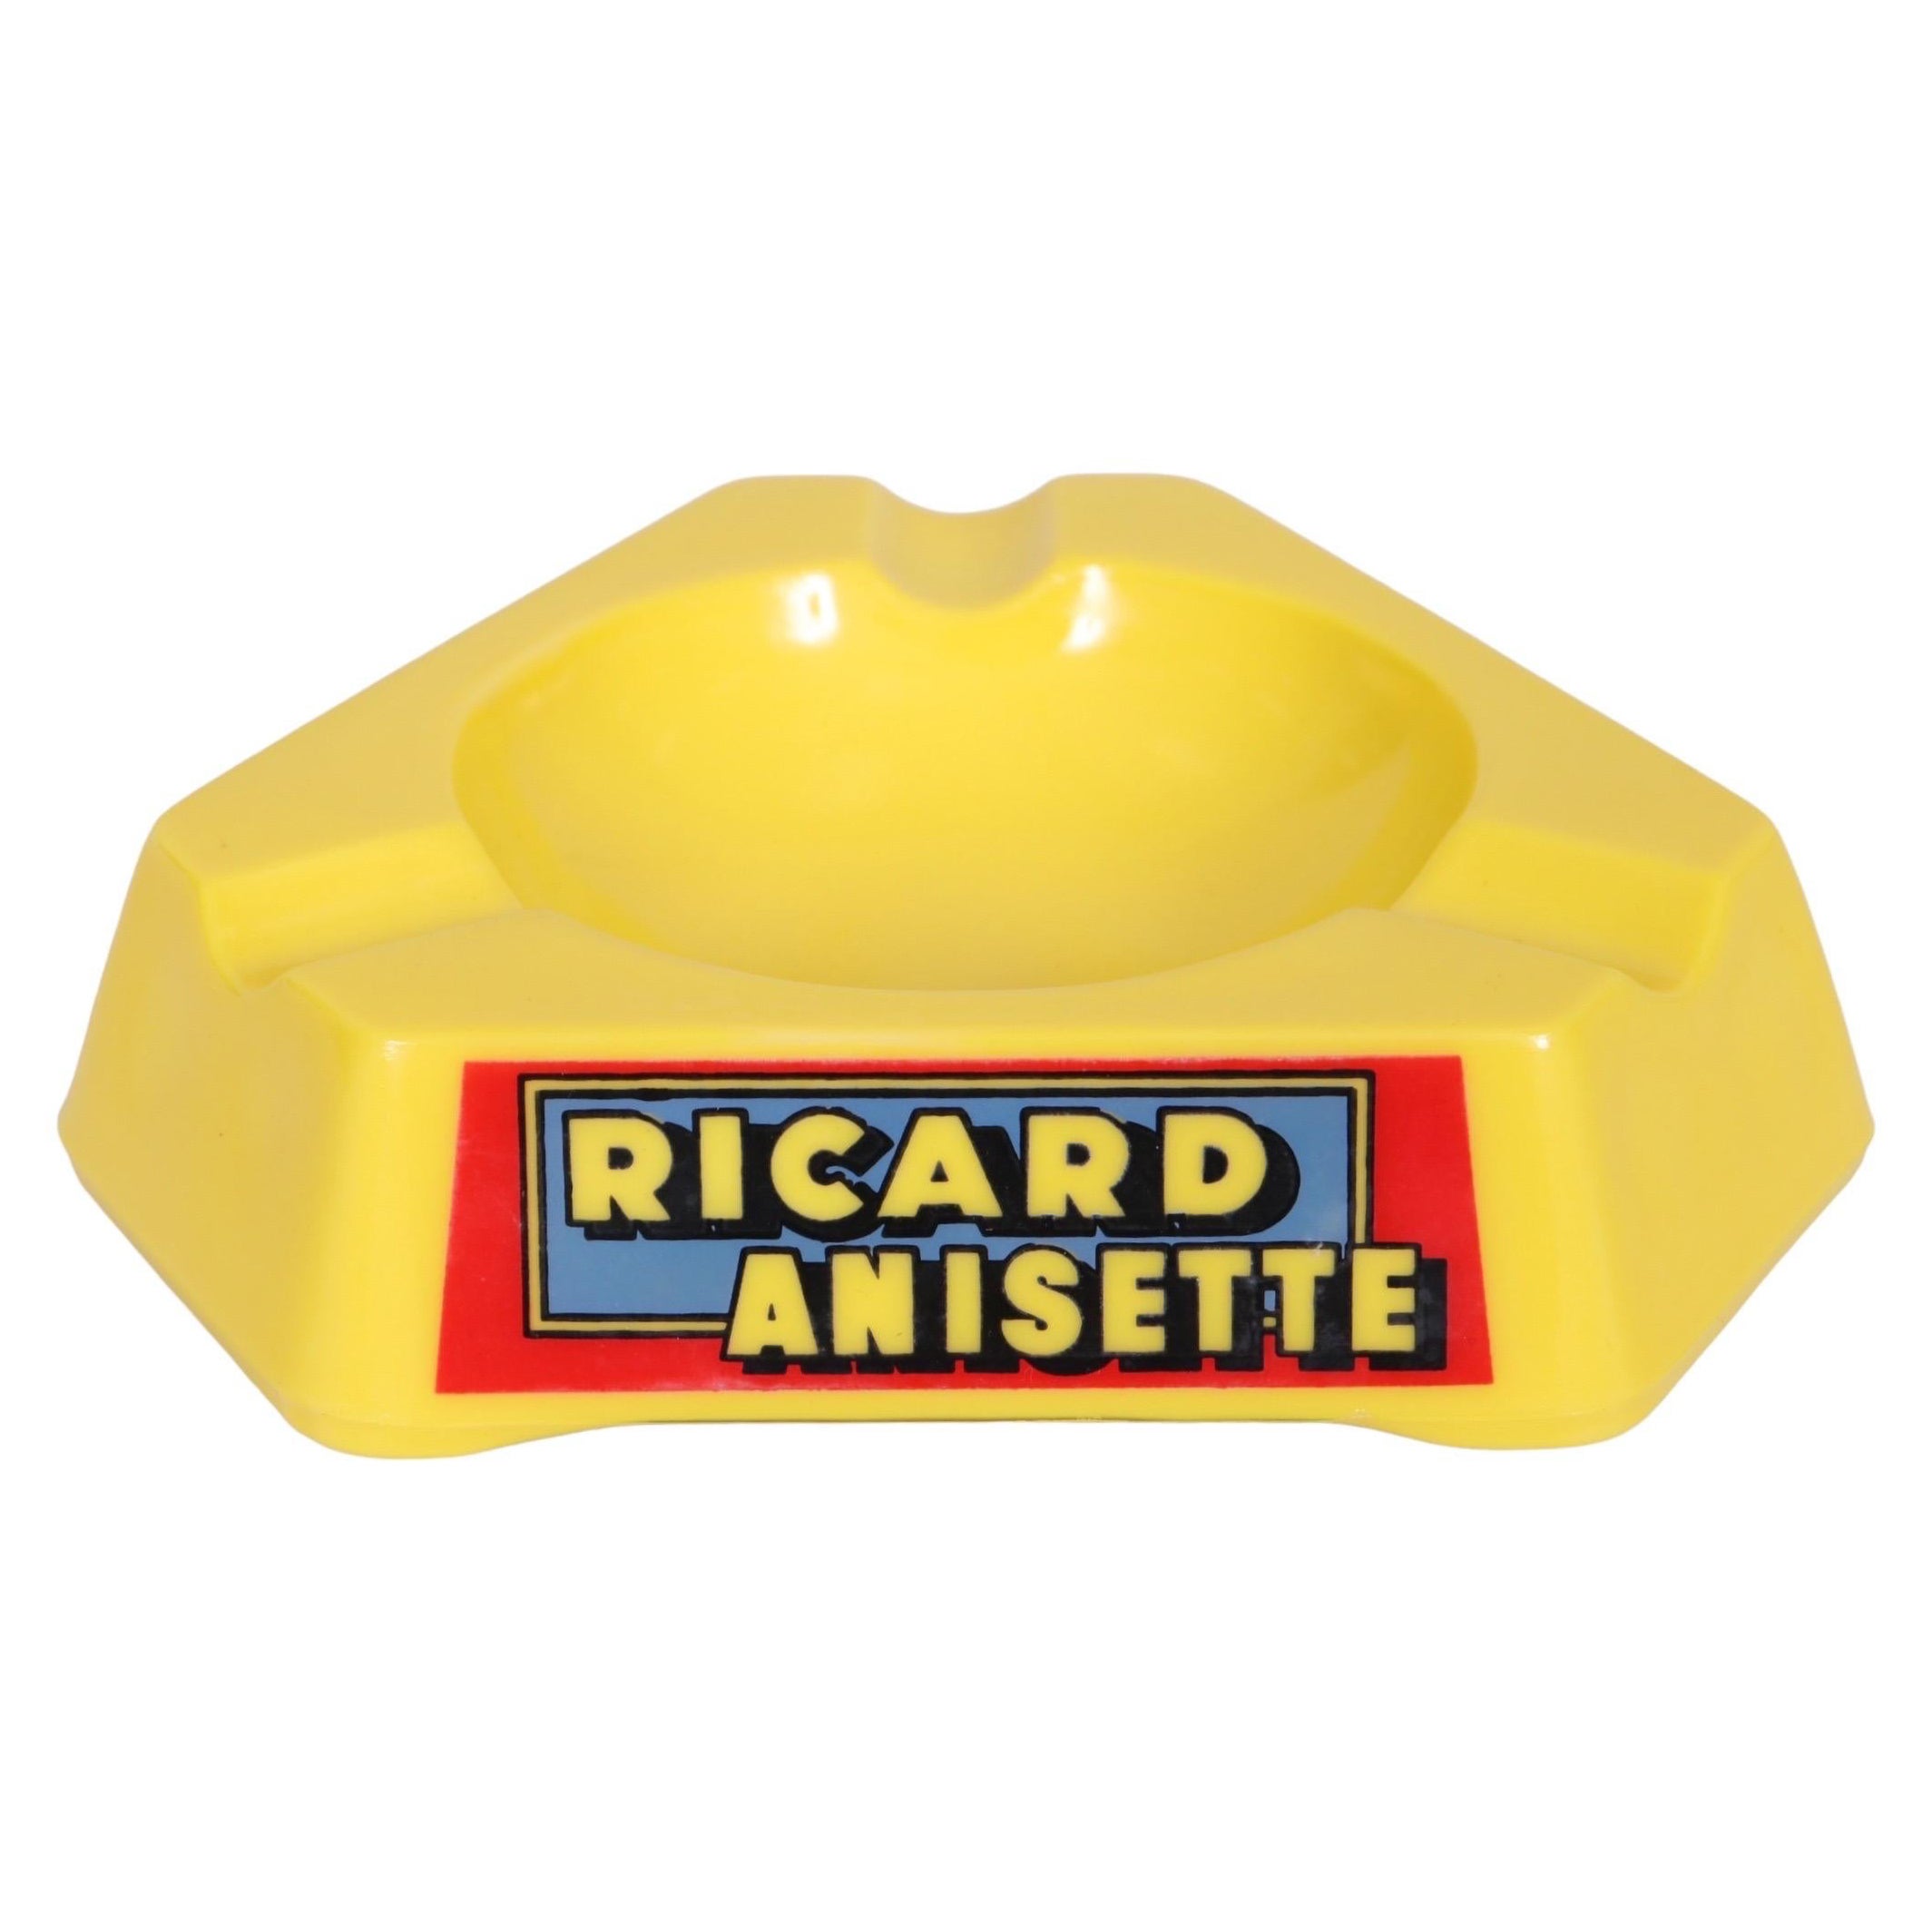 Ricard Anisette French Opalex Ashtray For Sale at 1stDibs